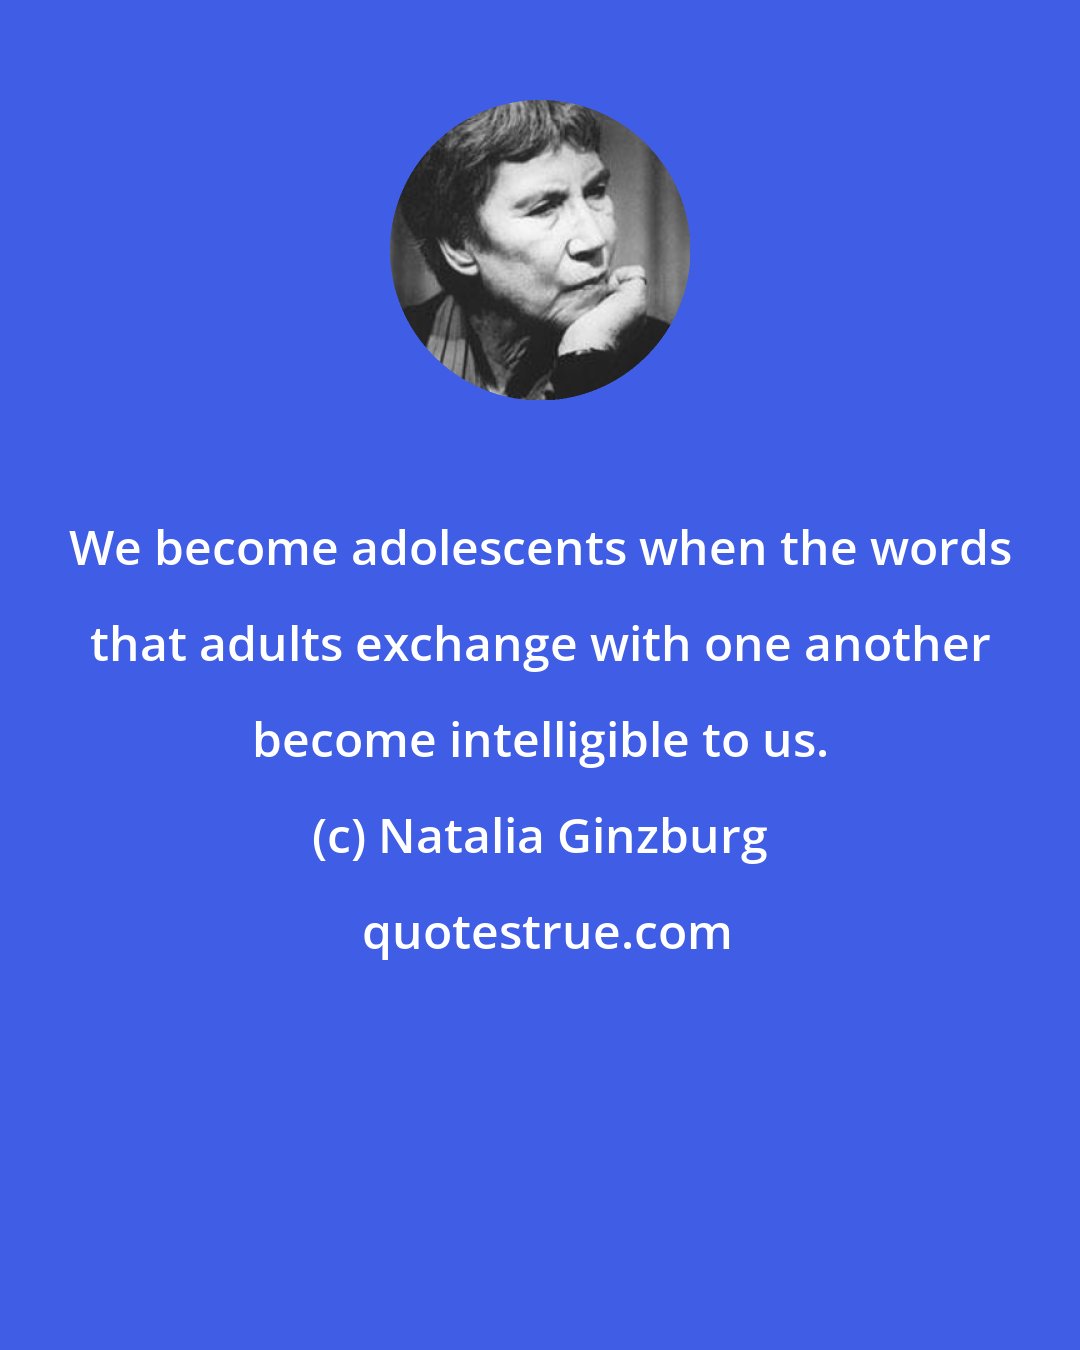 Natalia Ginzburg: We become adolescents when the words that adults exchange with one another become intelligible to us.